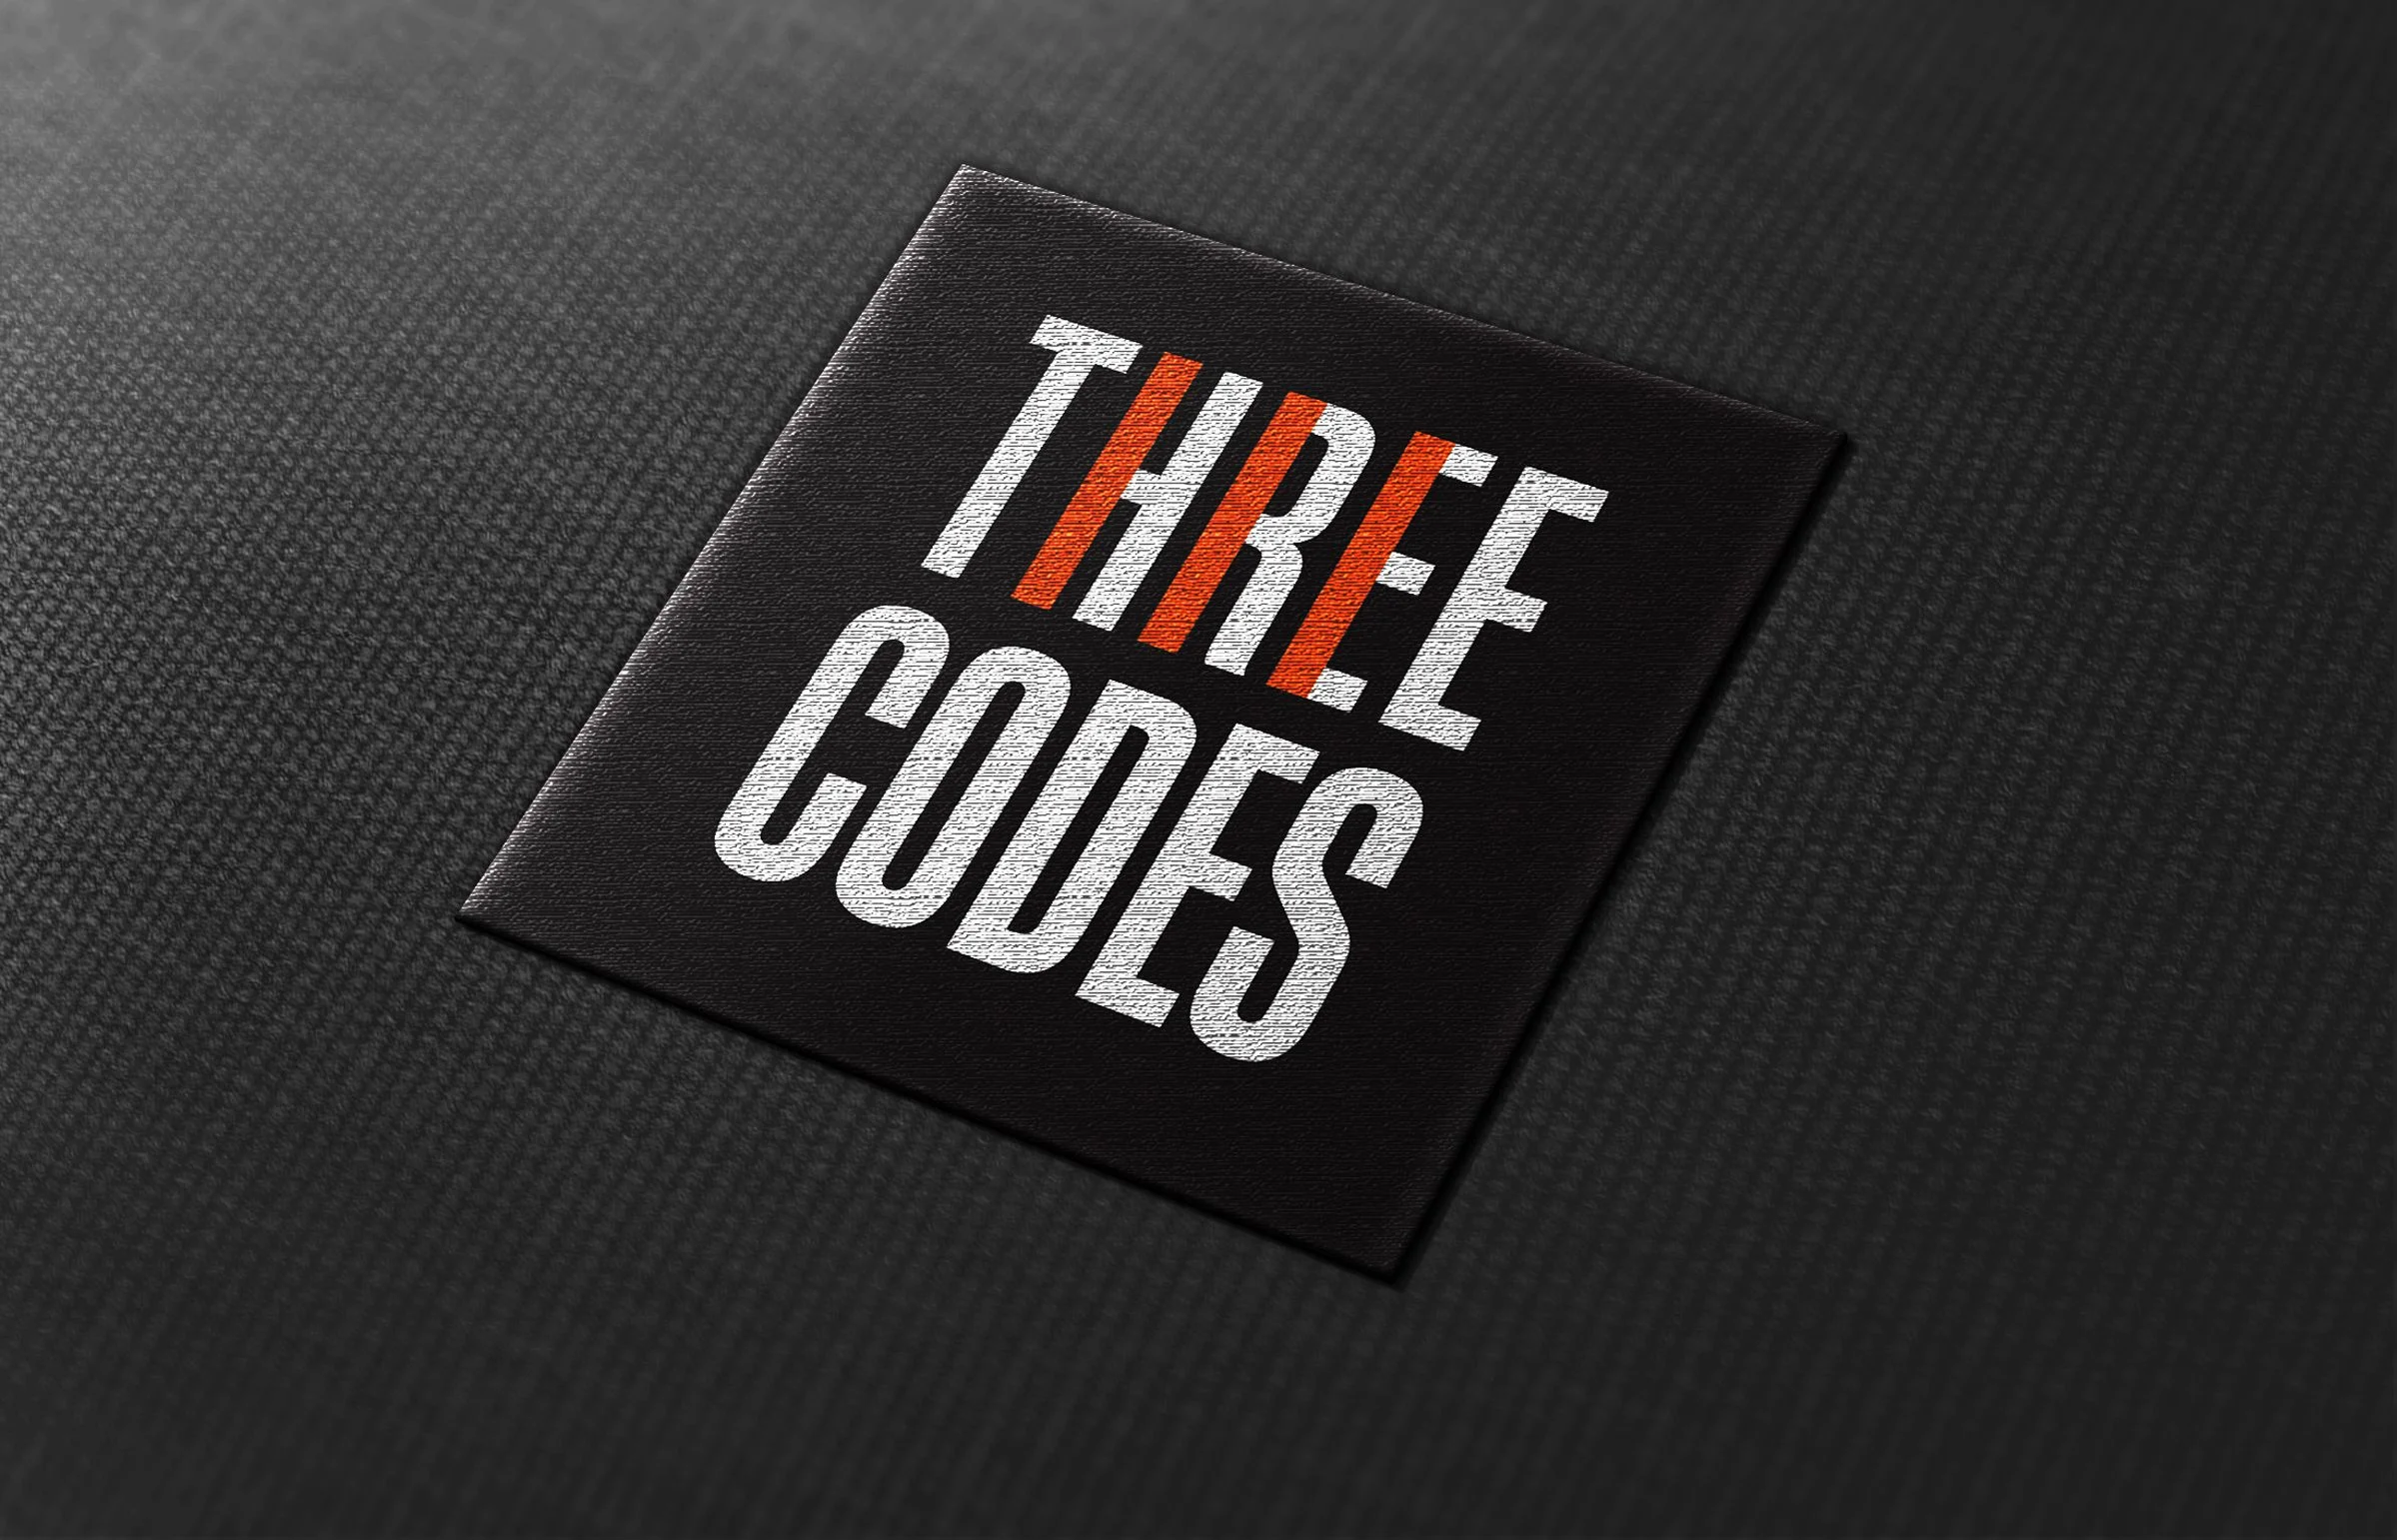 Badge for Three Codes, an electrical company by Ottawa Graphic Designer idApostle